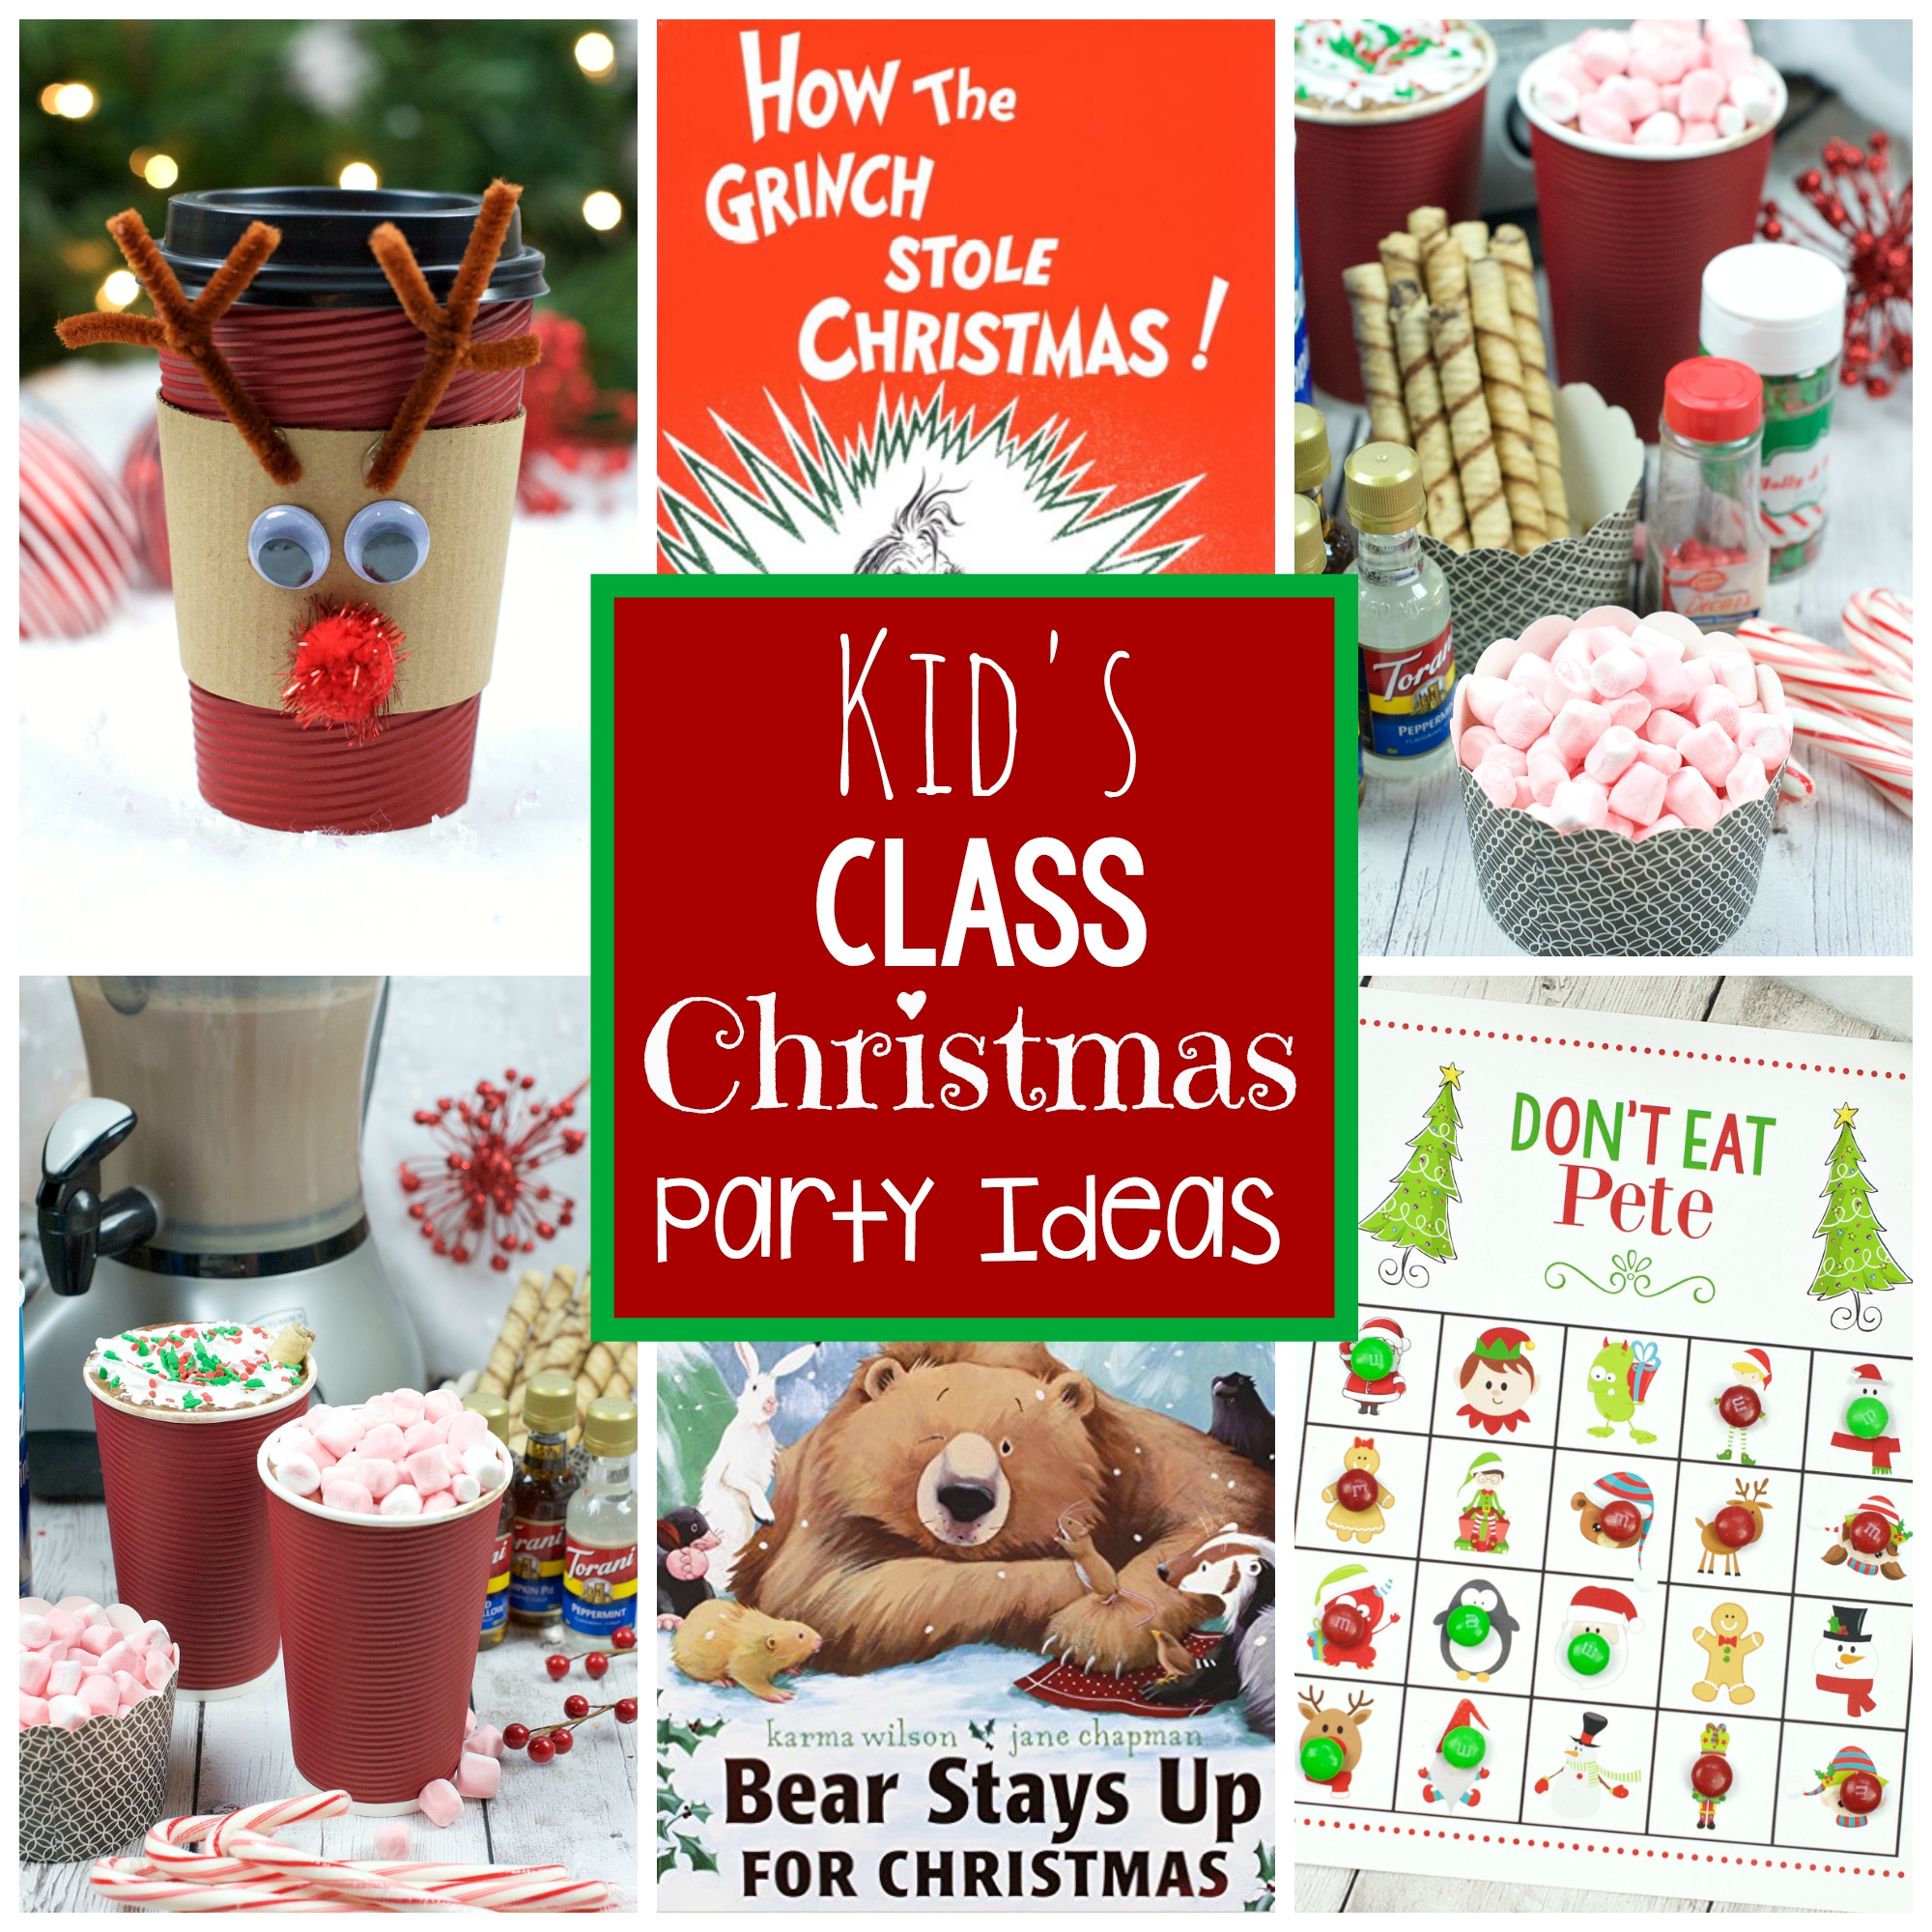 10 Attractive Christmas Pictures Ideas For Kids 25 kids christmas party ideas fun squared 2022